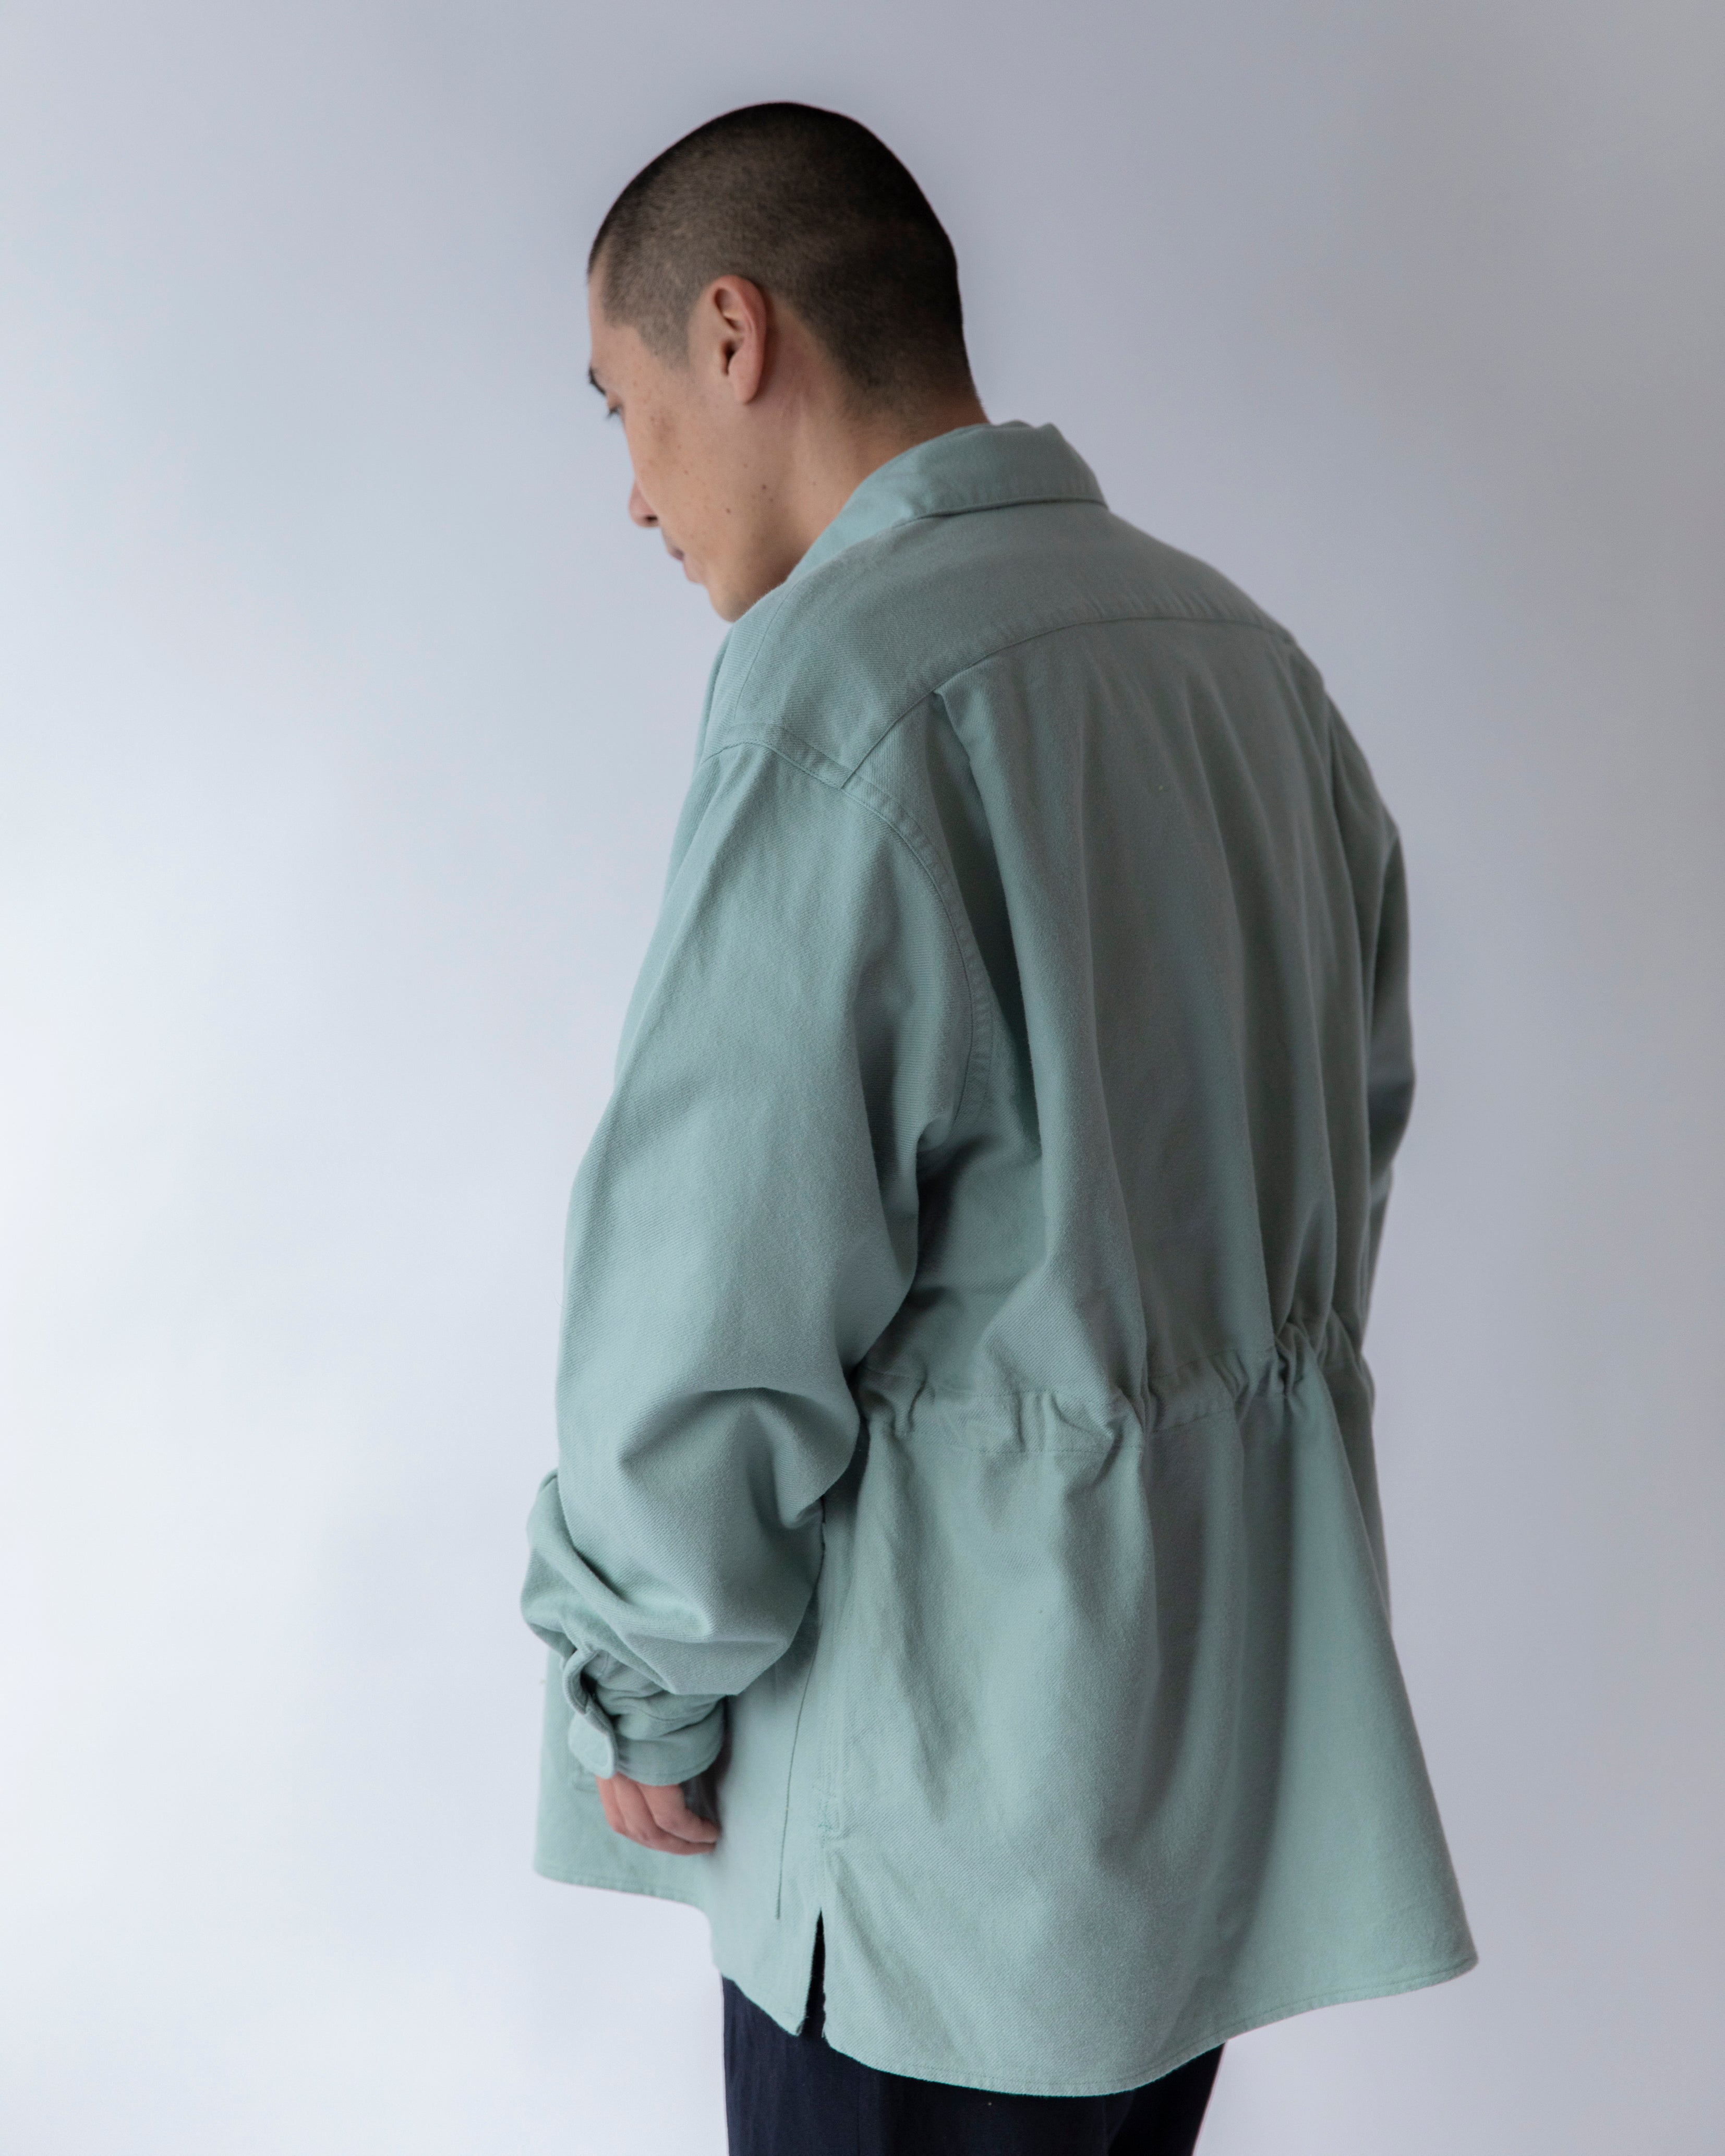 Name: E-Z GOING SHIRTS | Color:Pistachio | Size:Regular/Tall 【CITYLIGHTS PRODUCTS_シティライツプロダクツ】